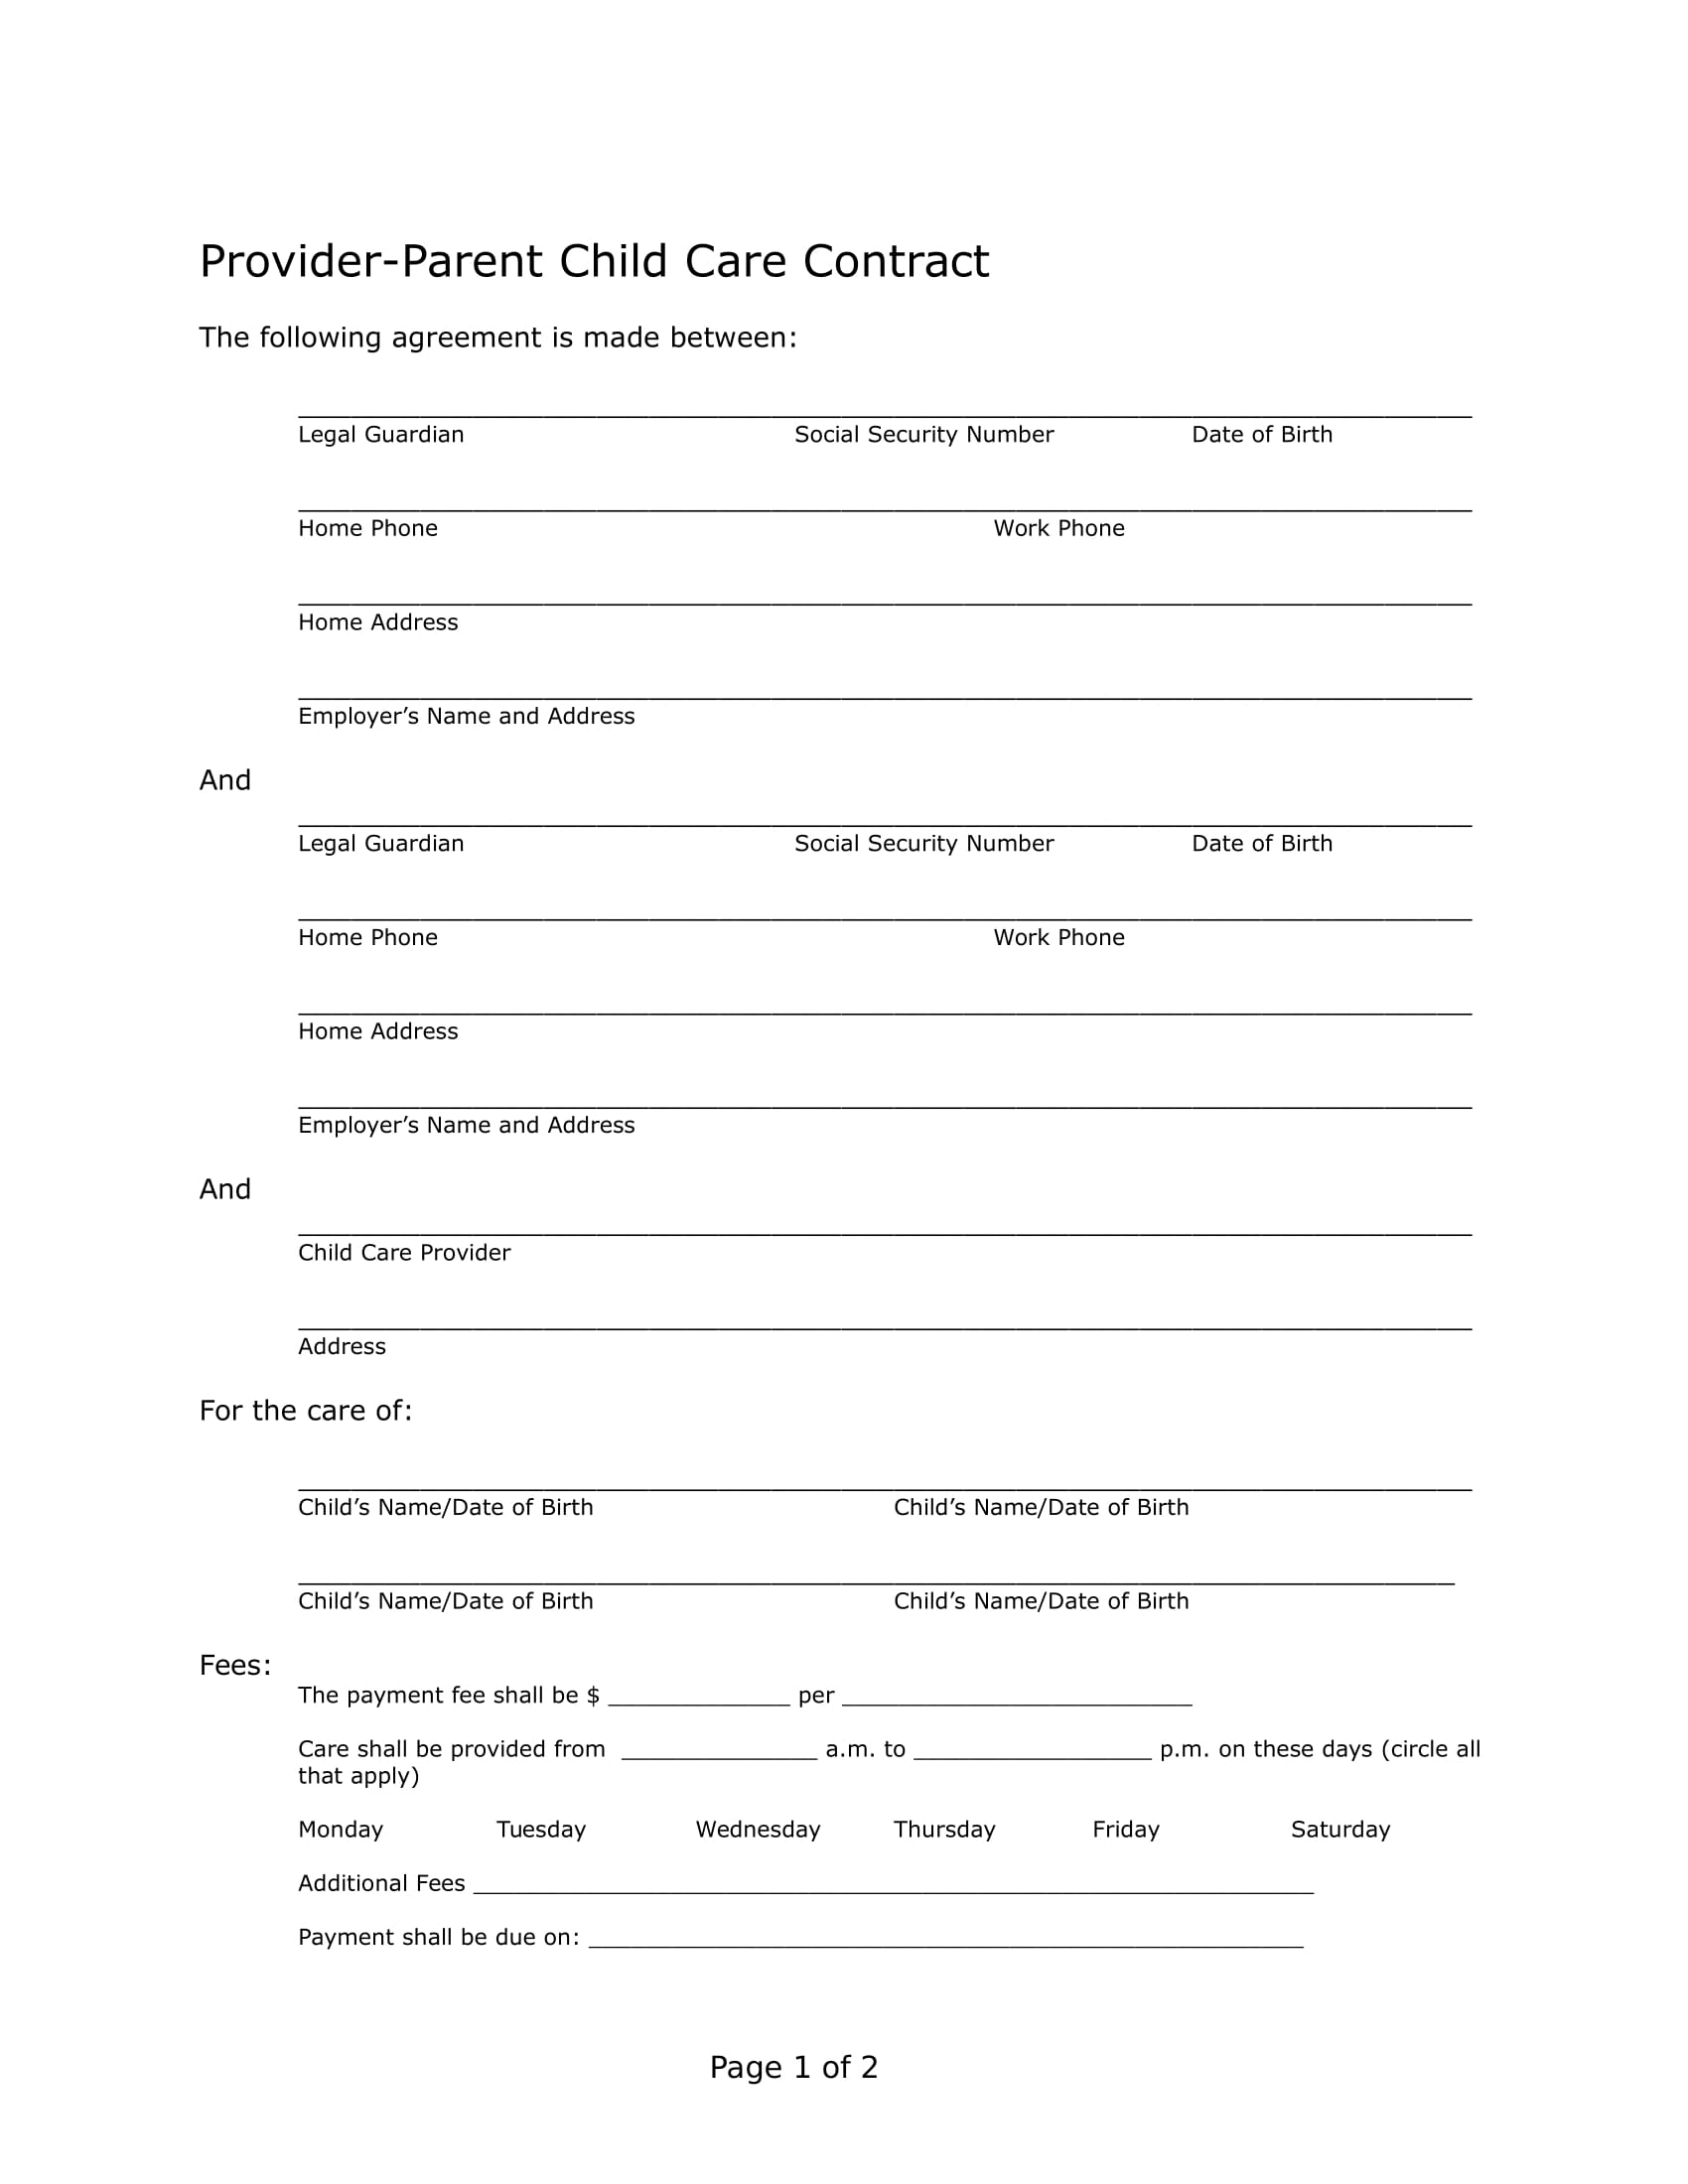 provider parent child care contract